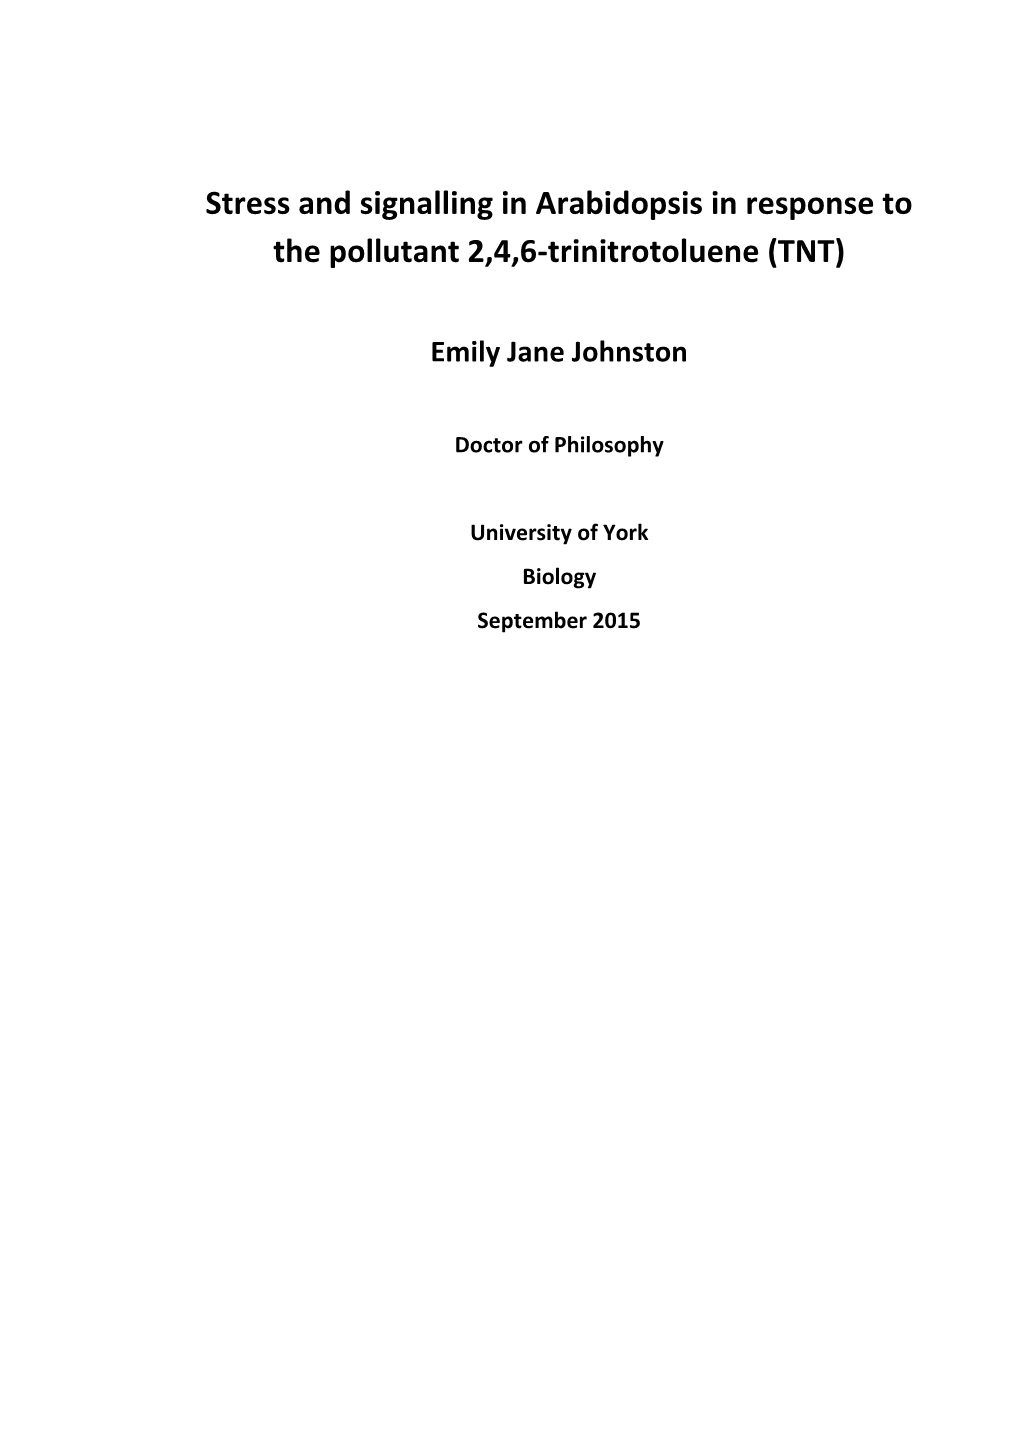 Stress and Signalling in Arabidopsis in Response to the Pollutant 2,4,6-Trinitrotoluene (TNT)